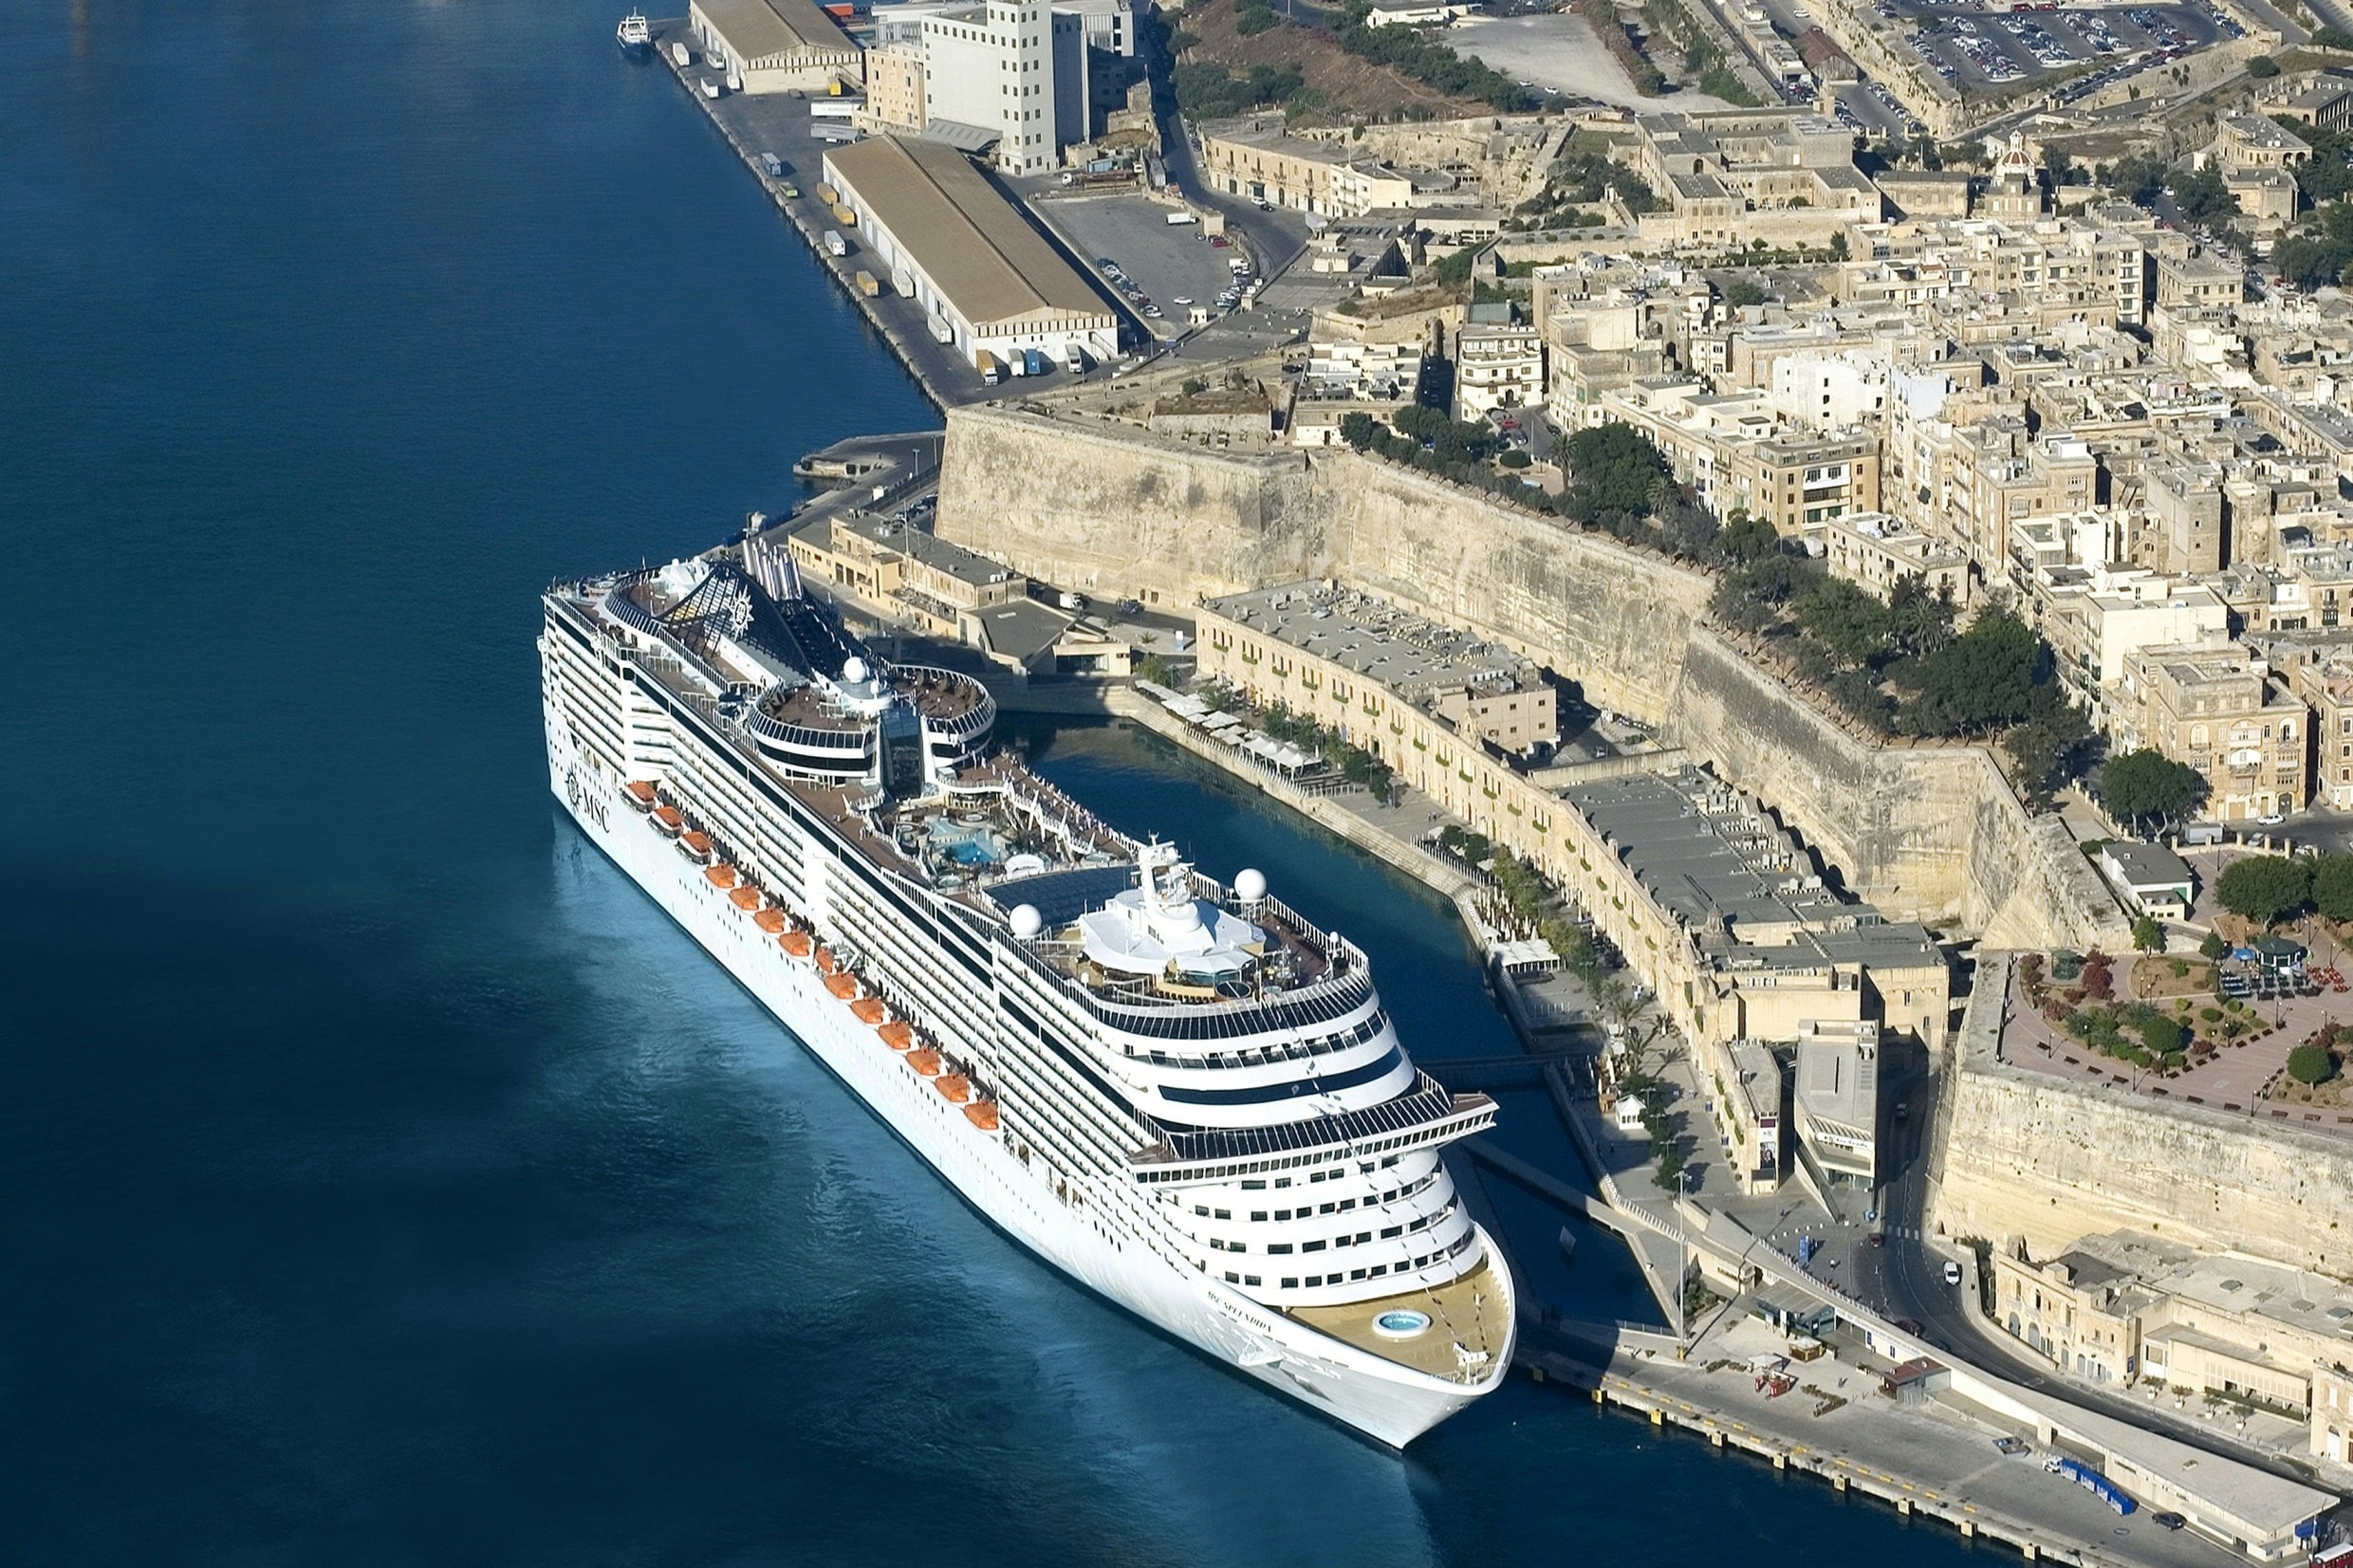 MSC Splendida is shown in Malta. The ship will sail from China starting in 2018. (Roderick Eime / Flickr)